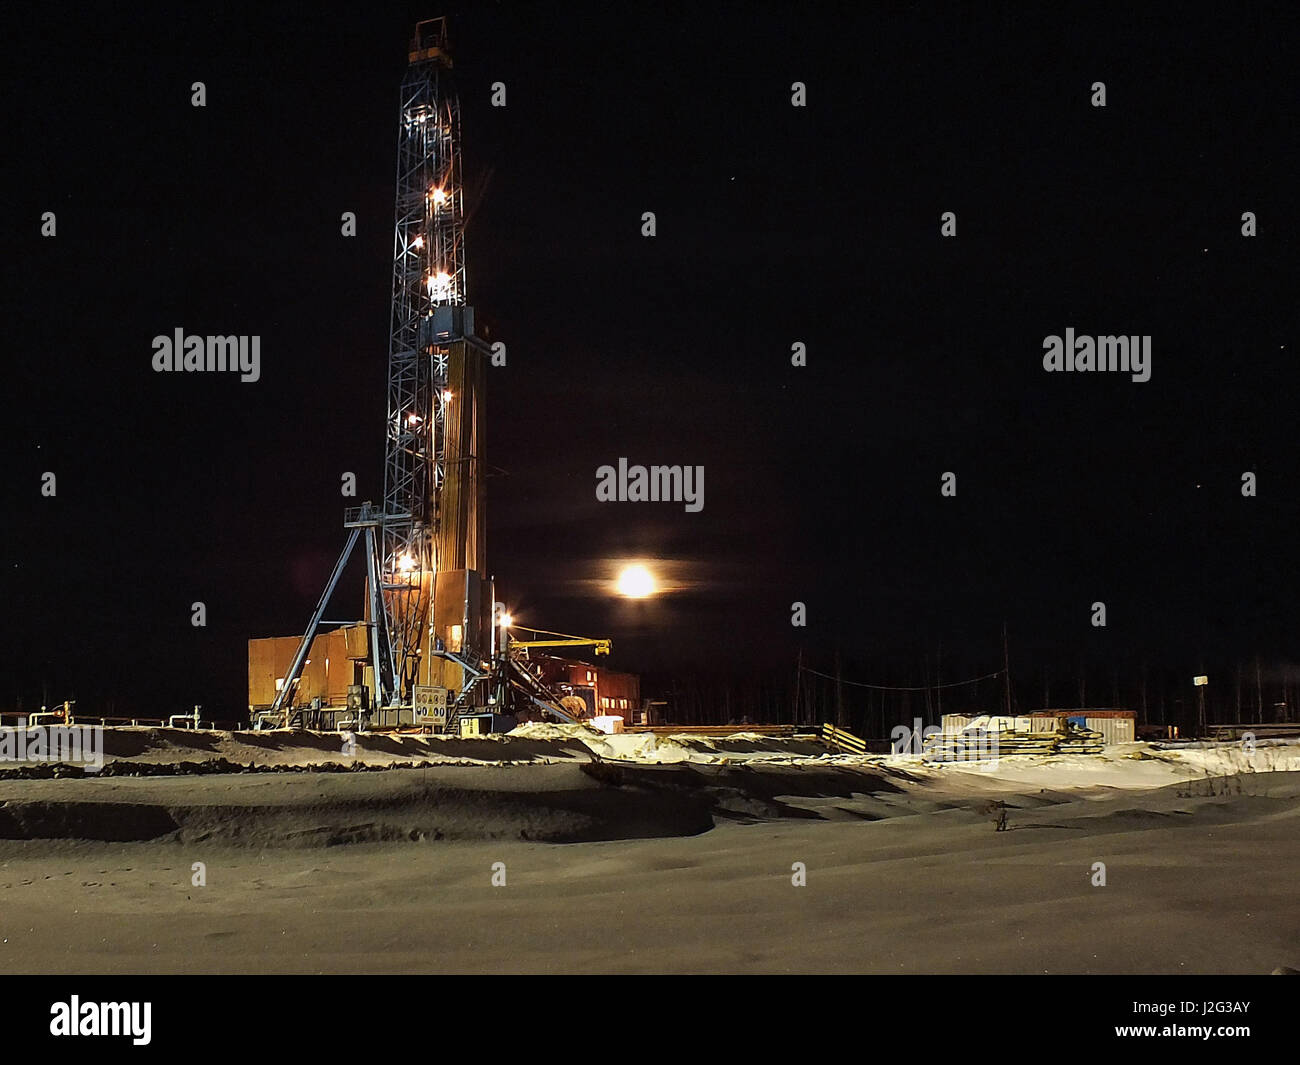 Mobile drilling rig. Night full moon. Stock Photo